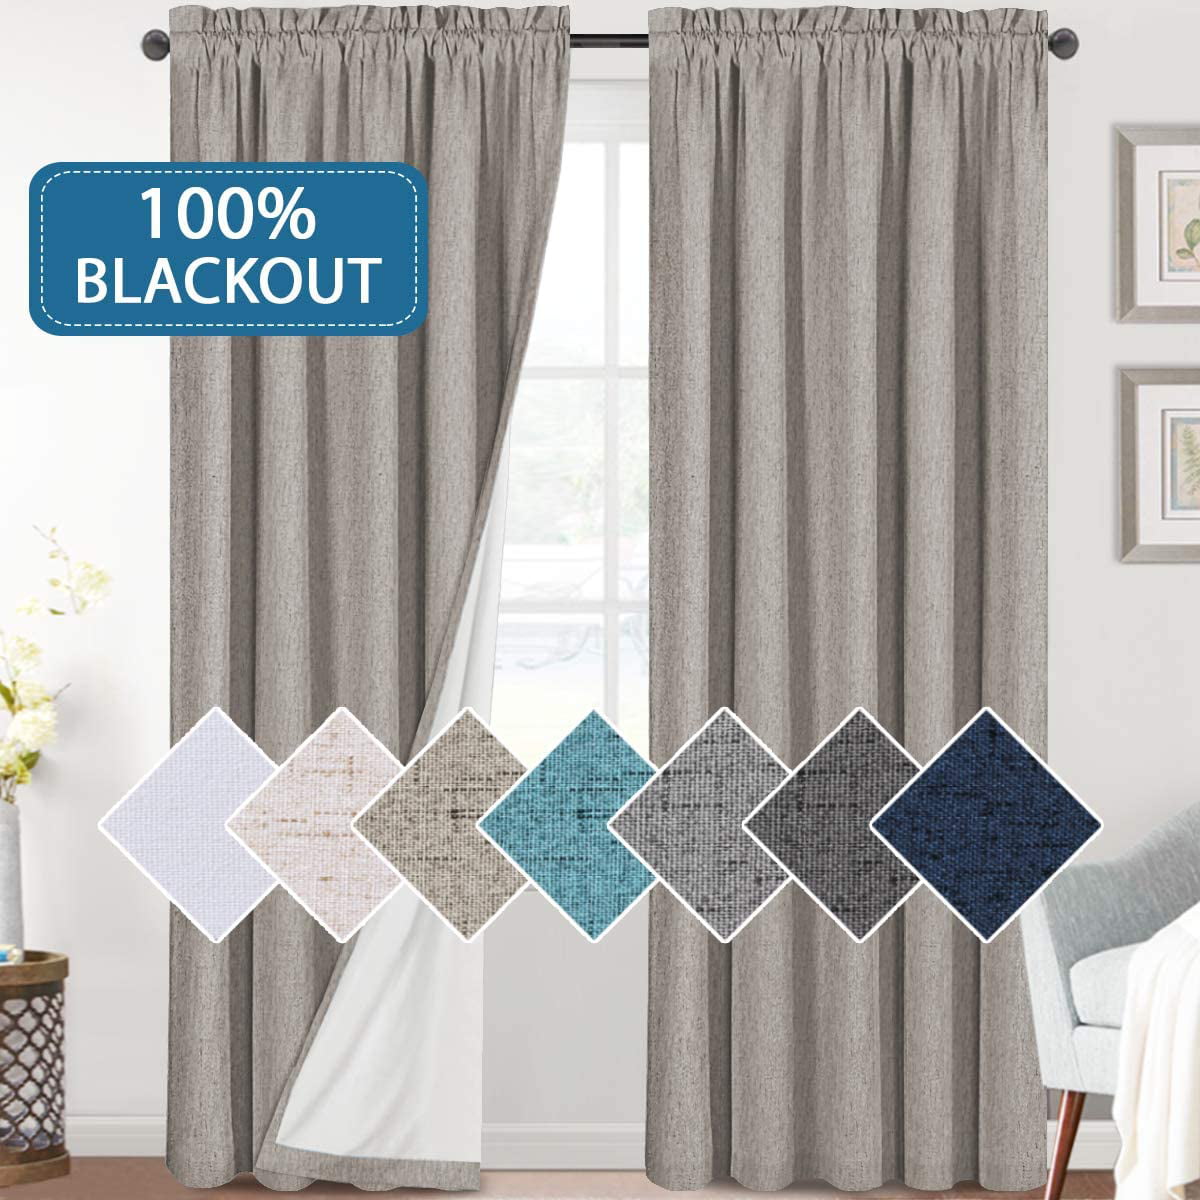 Eyelet Blackout Curtain White Mouse Animal Pencil Pleat Curtains Energy Saving Thermal Insulated Noise Reducing Solid Curtain Drapes Room Darkening for Childrens Livingroom Bedroom Kitchen 55 x 63